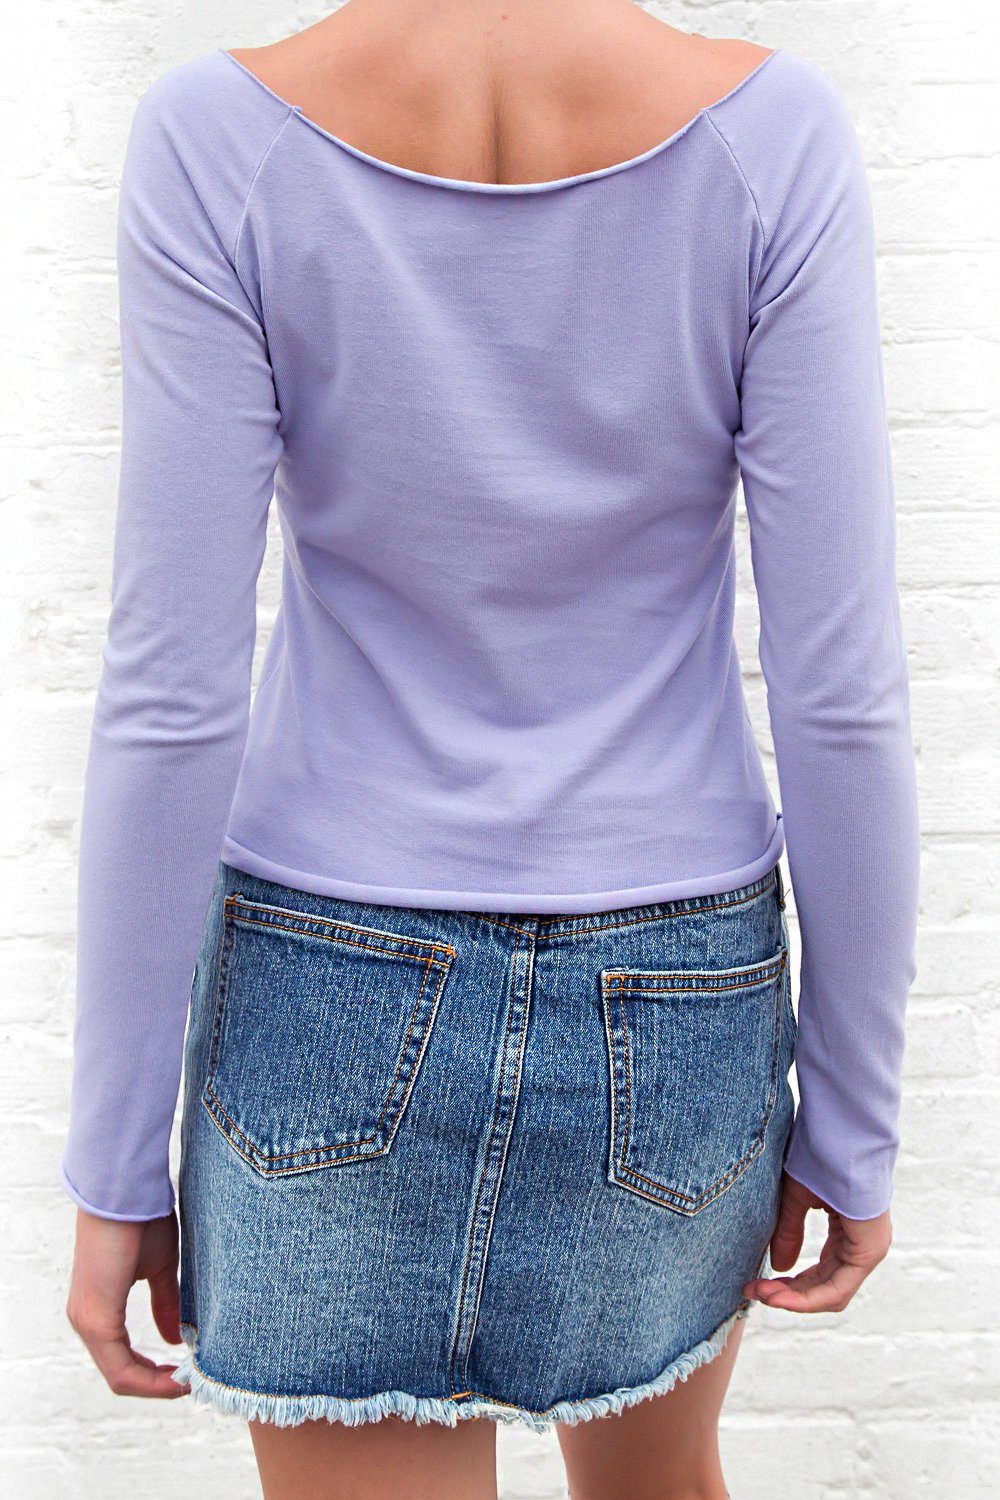 BRANDY MELVILLE PURPLE taupe ribbed light weight button up Paige top NWT sz  S £17.74 - PicClick UK